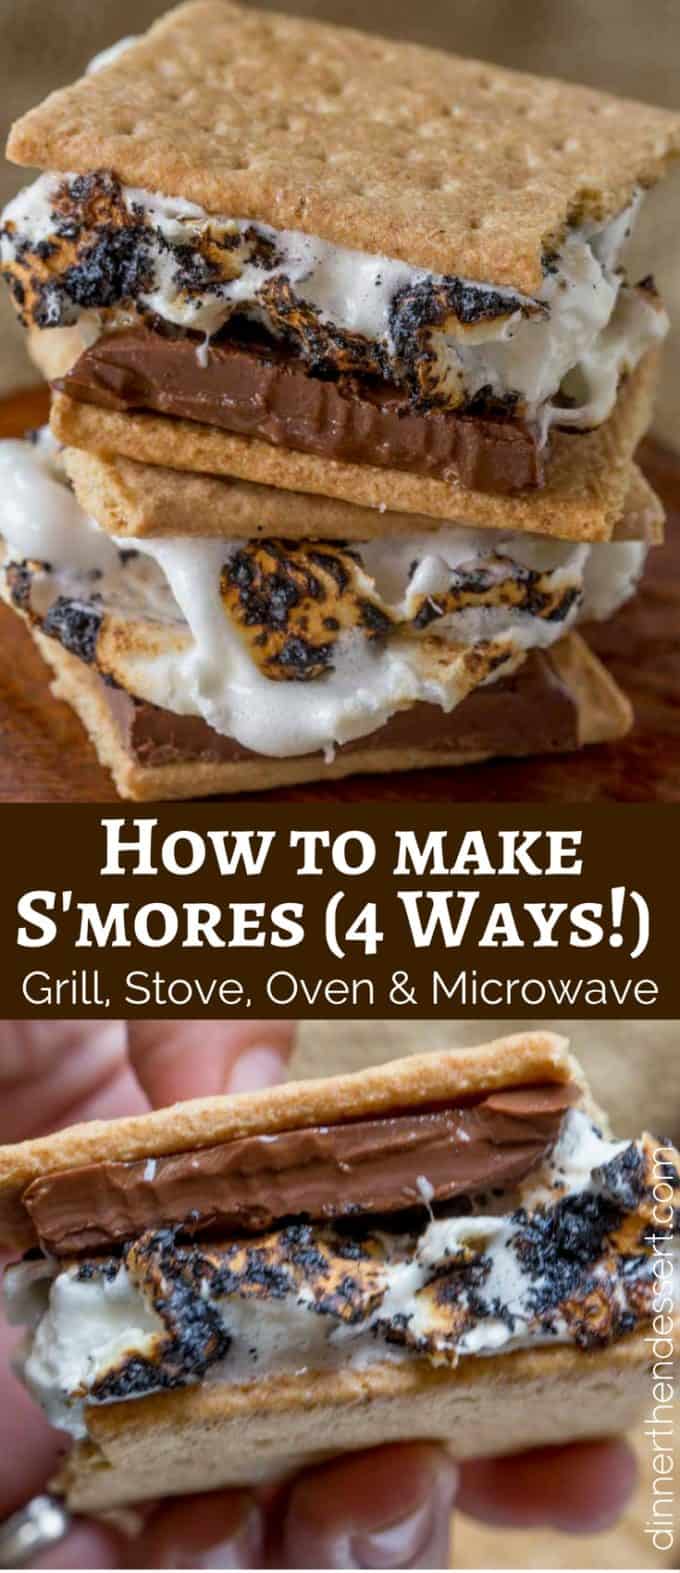 How to make the perfect S'mores that will take you back to your childhood on the stove, in the microwave, in the oven and on the grill.